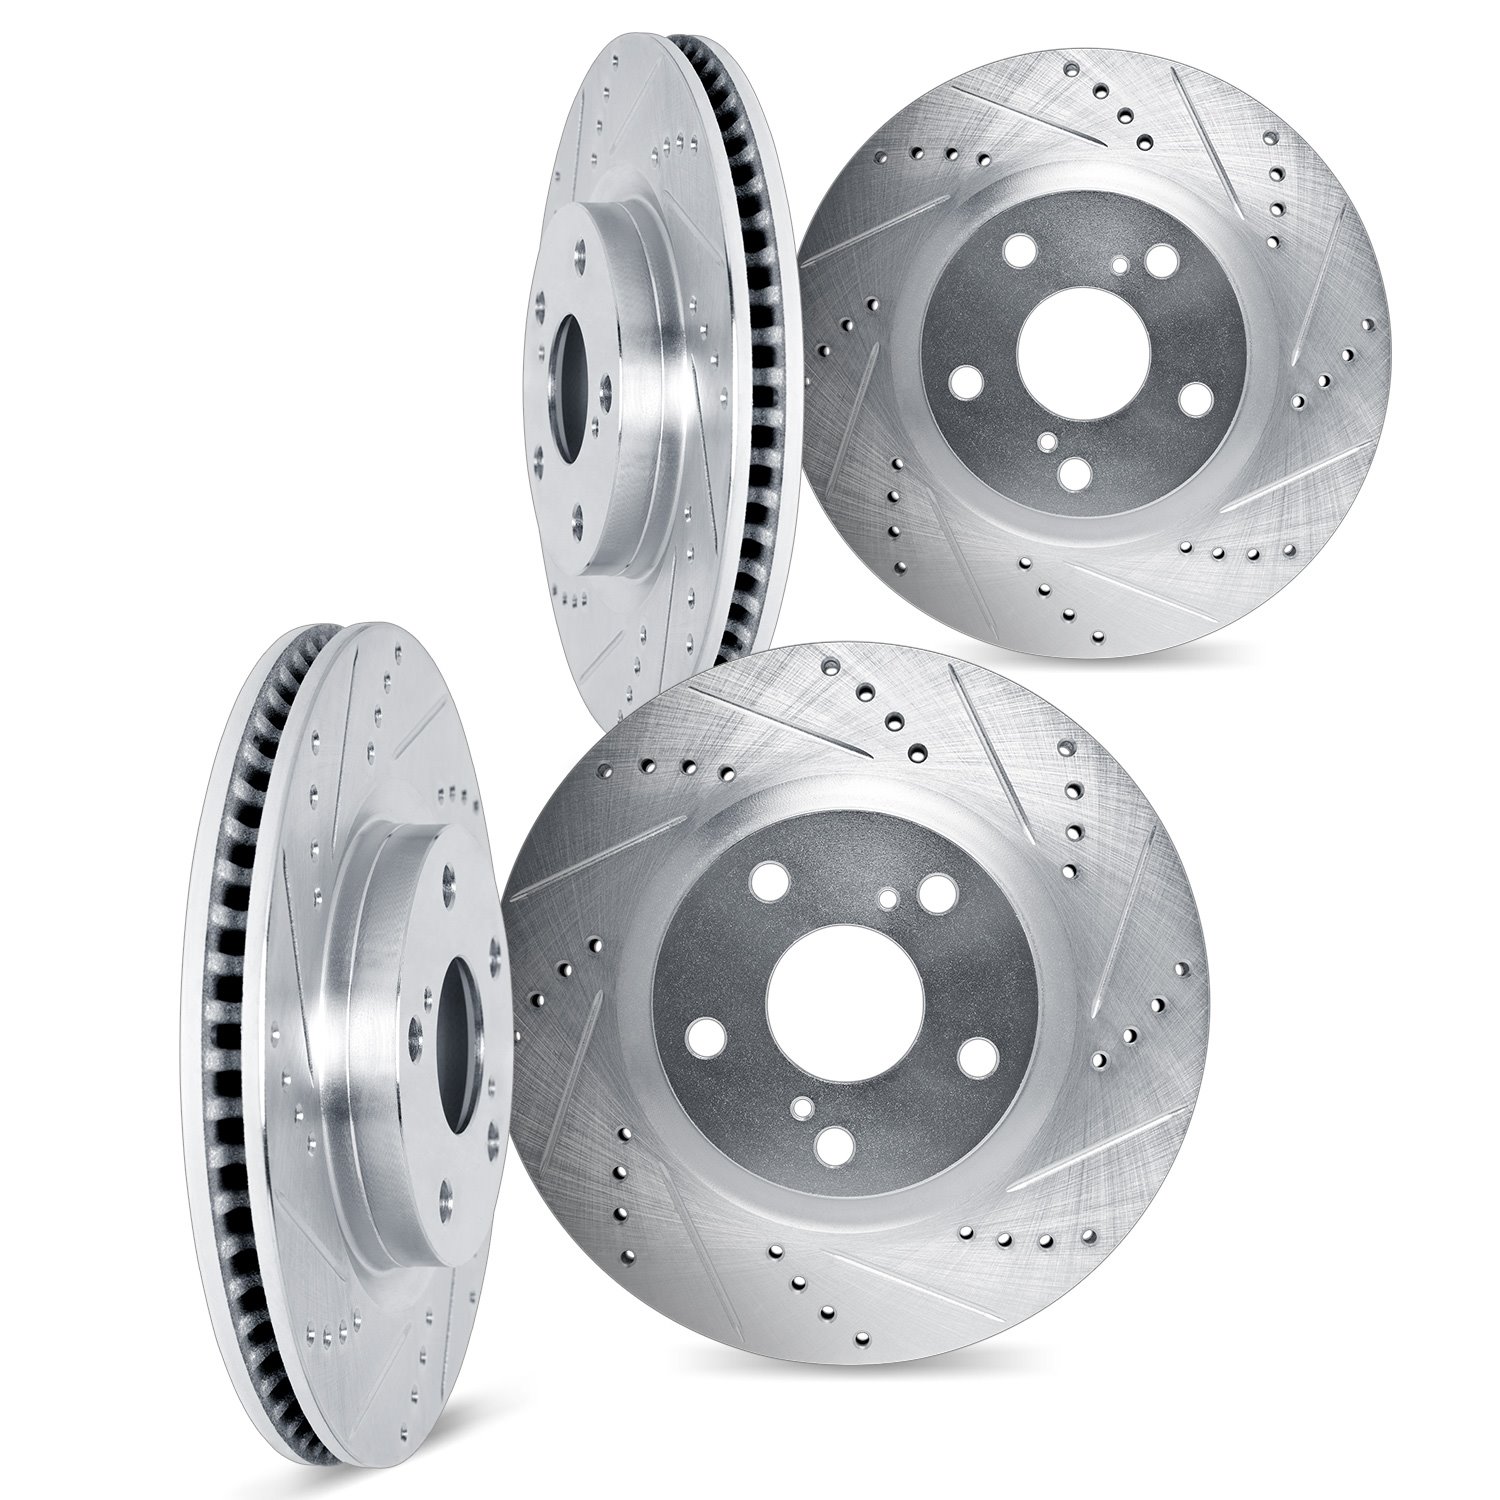 7004-20019 Drilled/Slotted Brake Rotors [Silver], Fits Select Jaguar, Position: Front and Rear